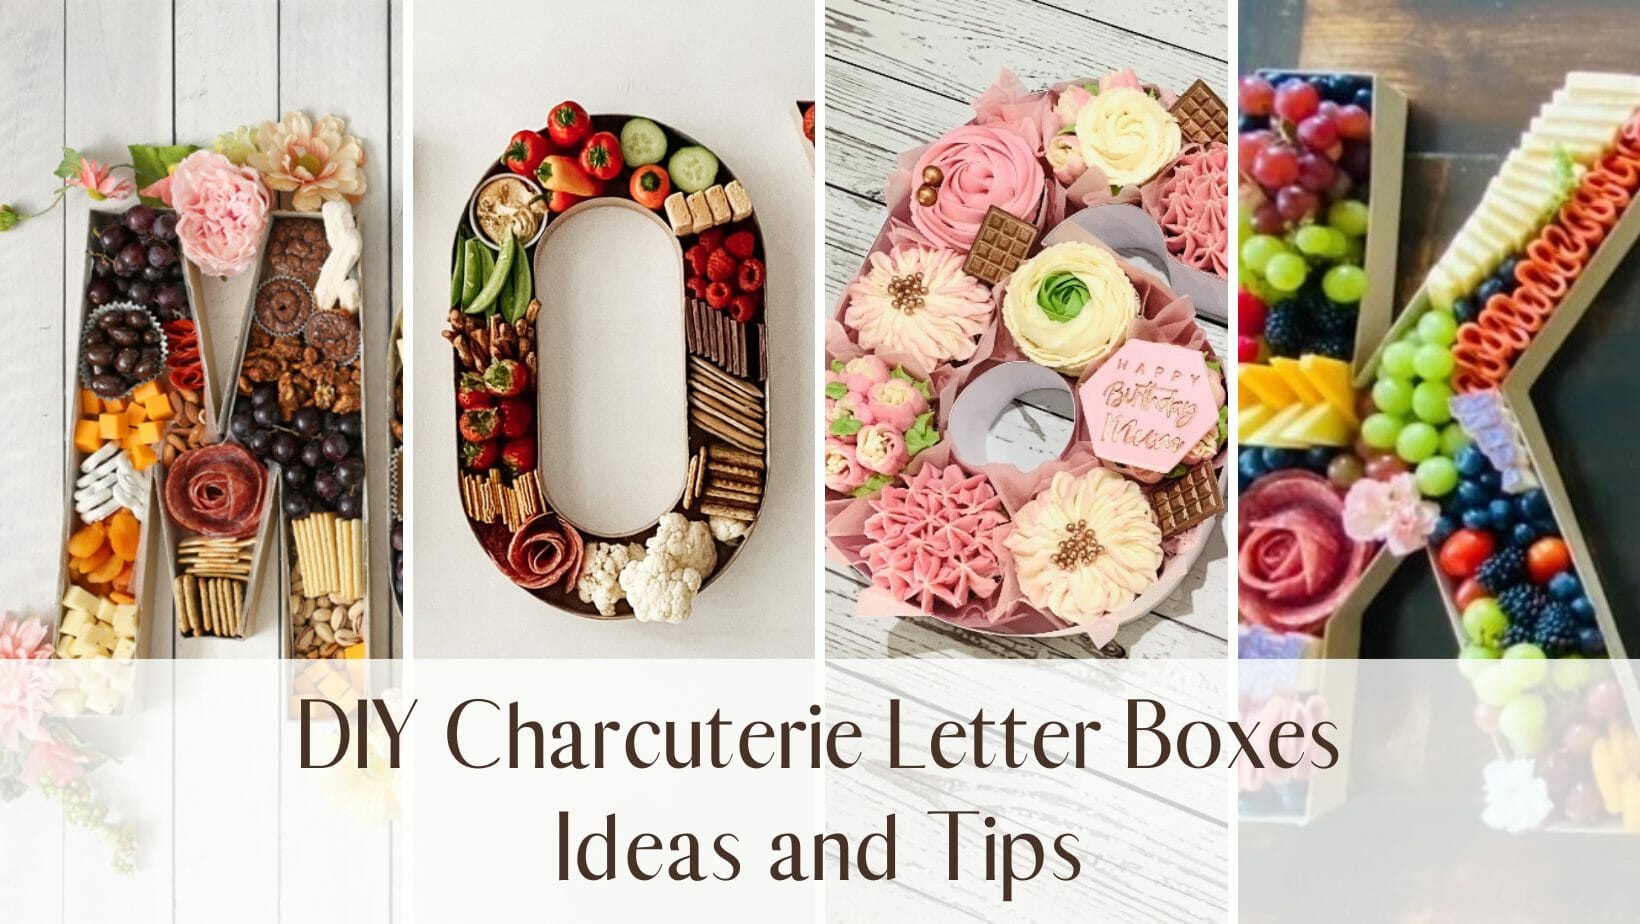 DIY Charcuterie Letter Boxes: Ideas and Tips - Charcuterie Association